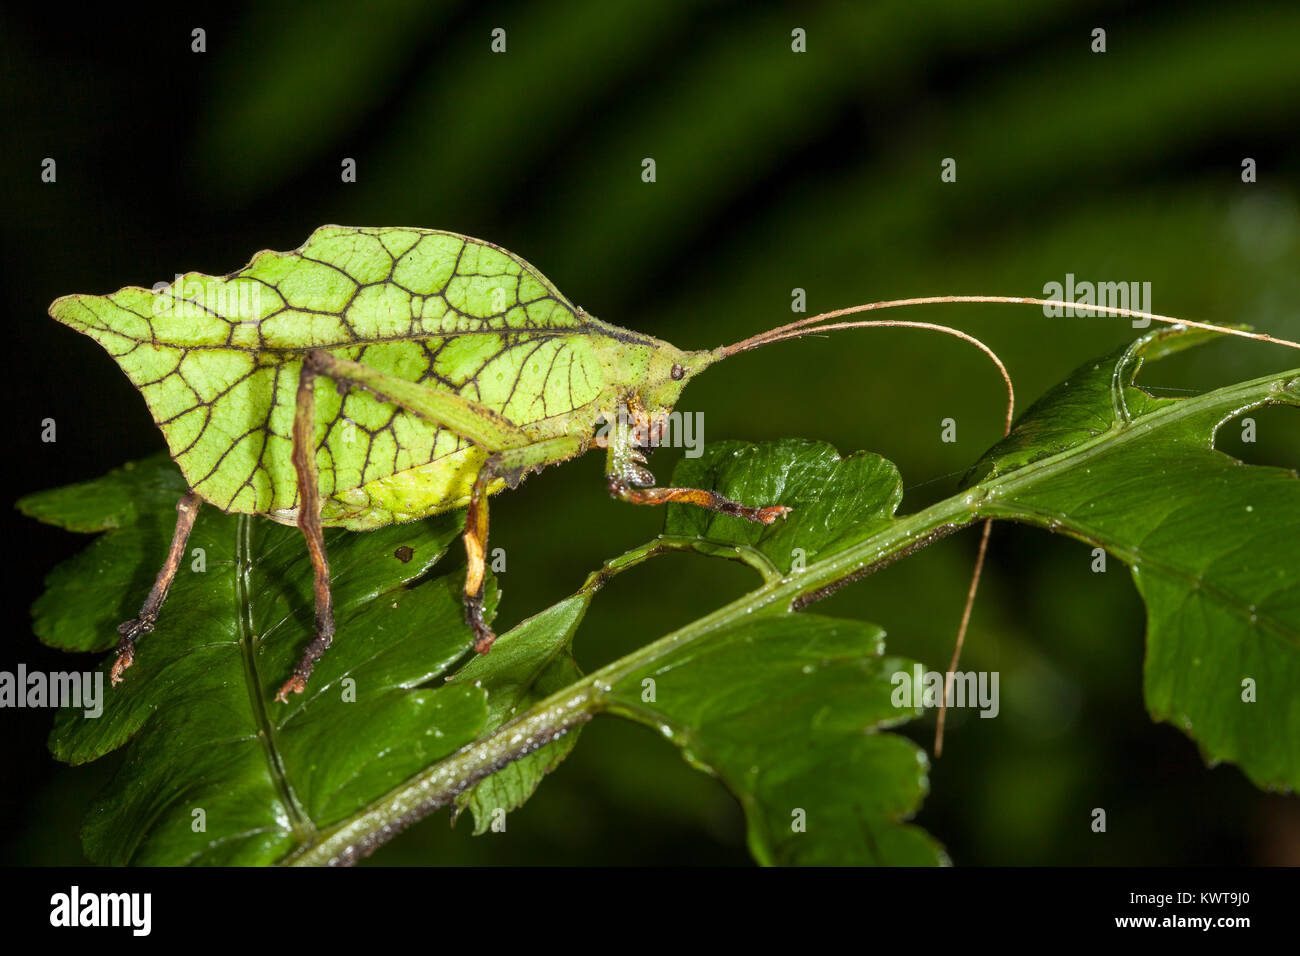 An exceptionally well-camouflaged katydid, resembling a leaf. This is an excellent example of crypsis. Stock Photo